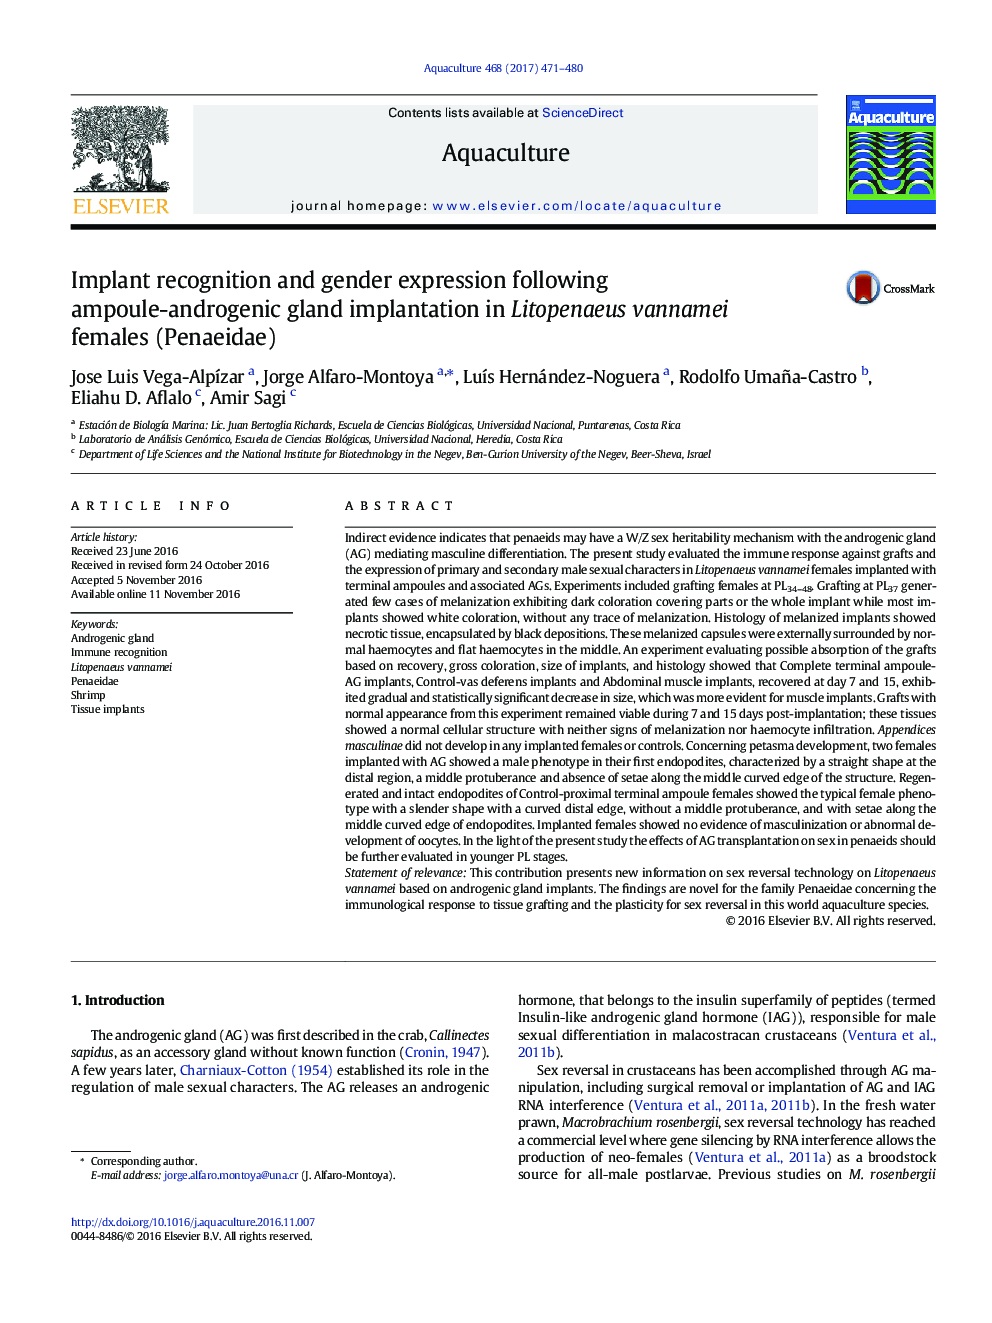 Implant recognition and gender expression following ampoule-androgenic gland implantation in Litopenaeus vannamei females (Penaeidae)